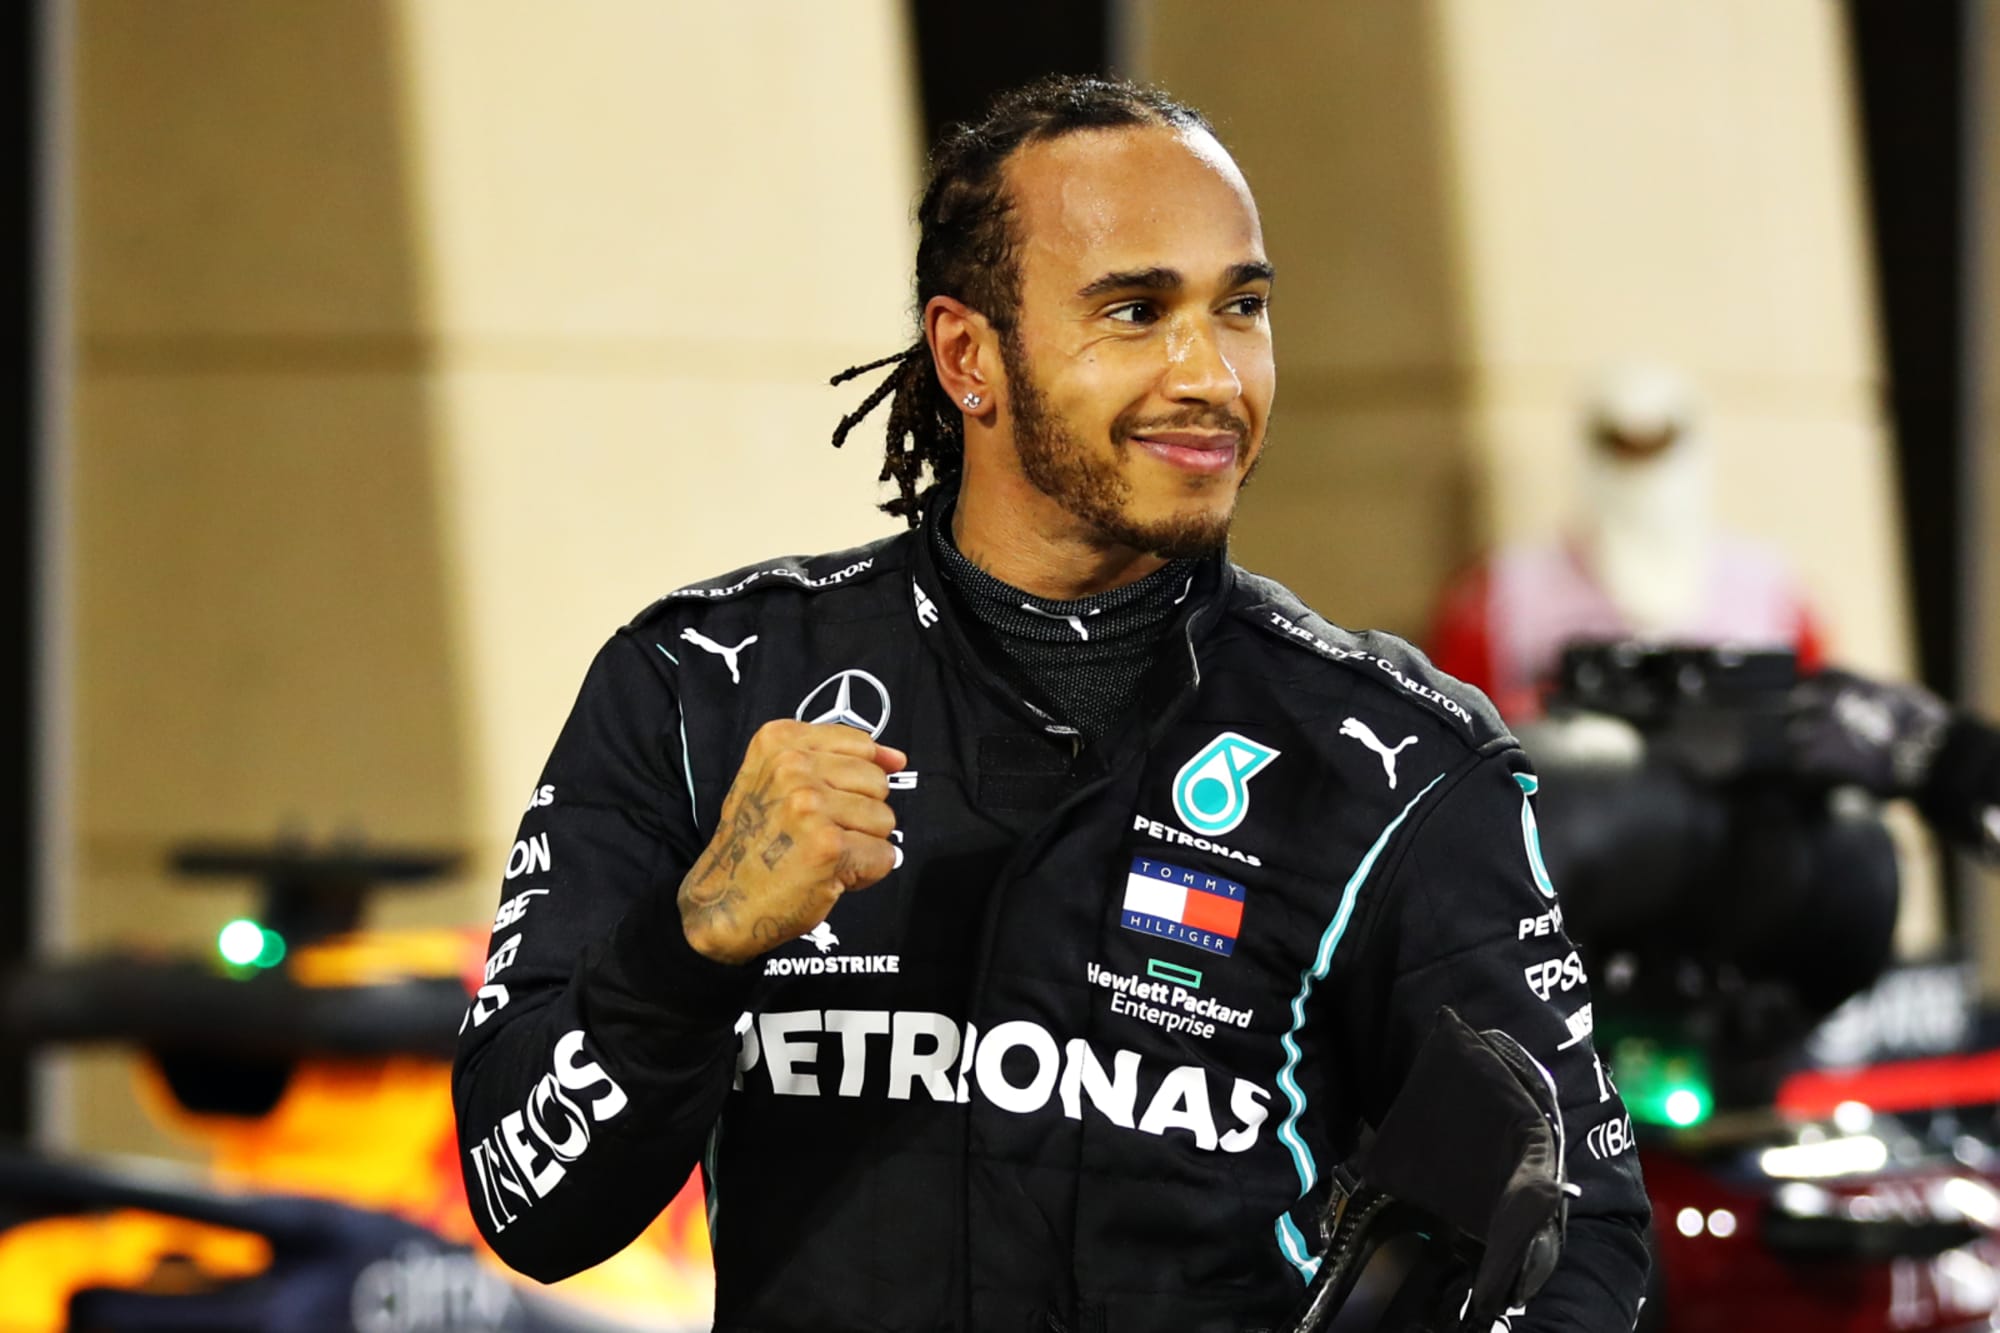 Lewis Hamilton Contract 2021 wallpaper justed